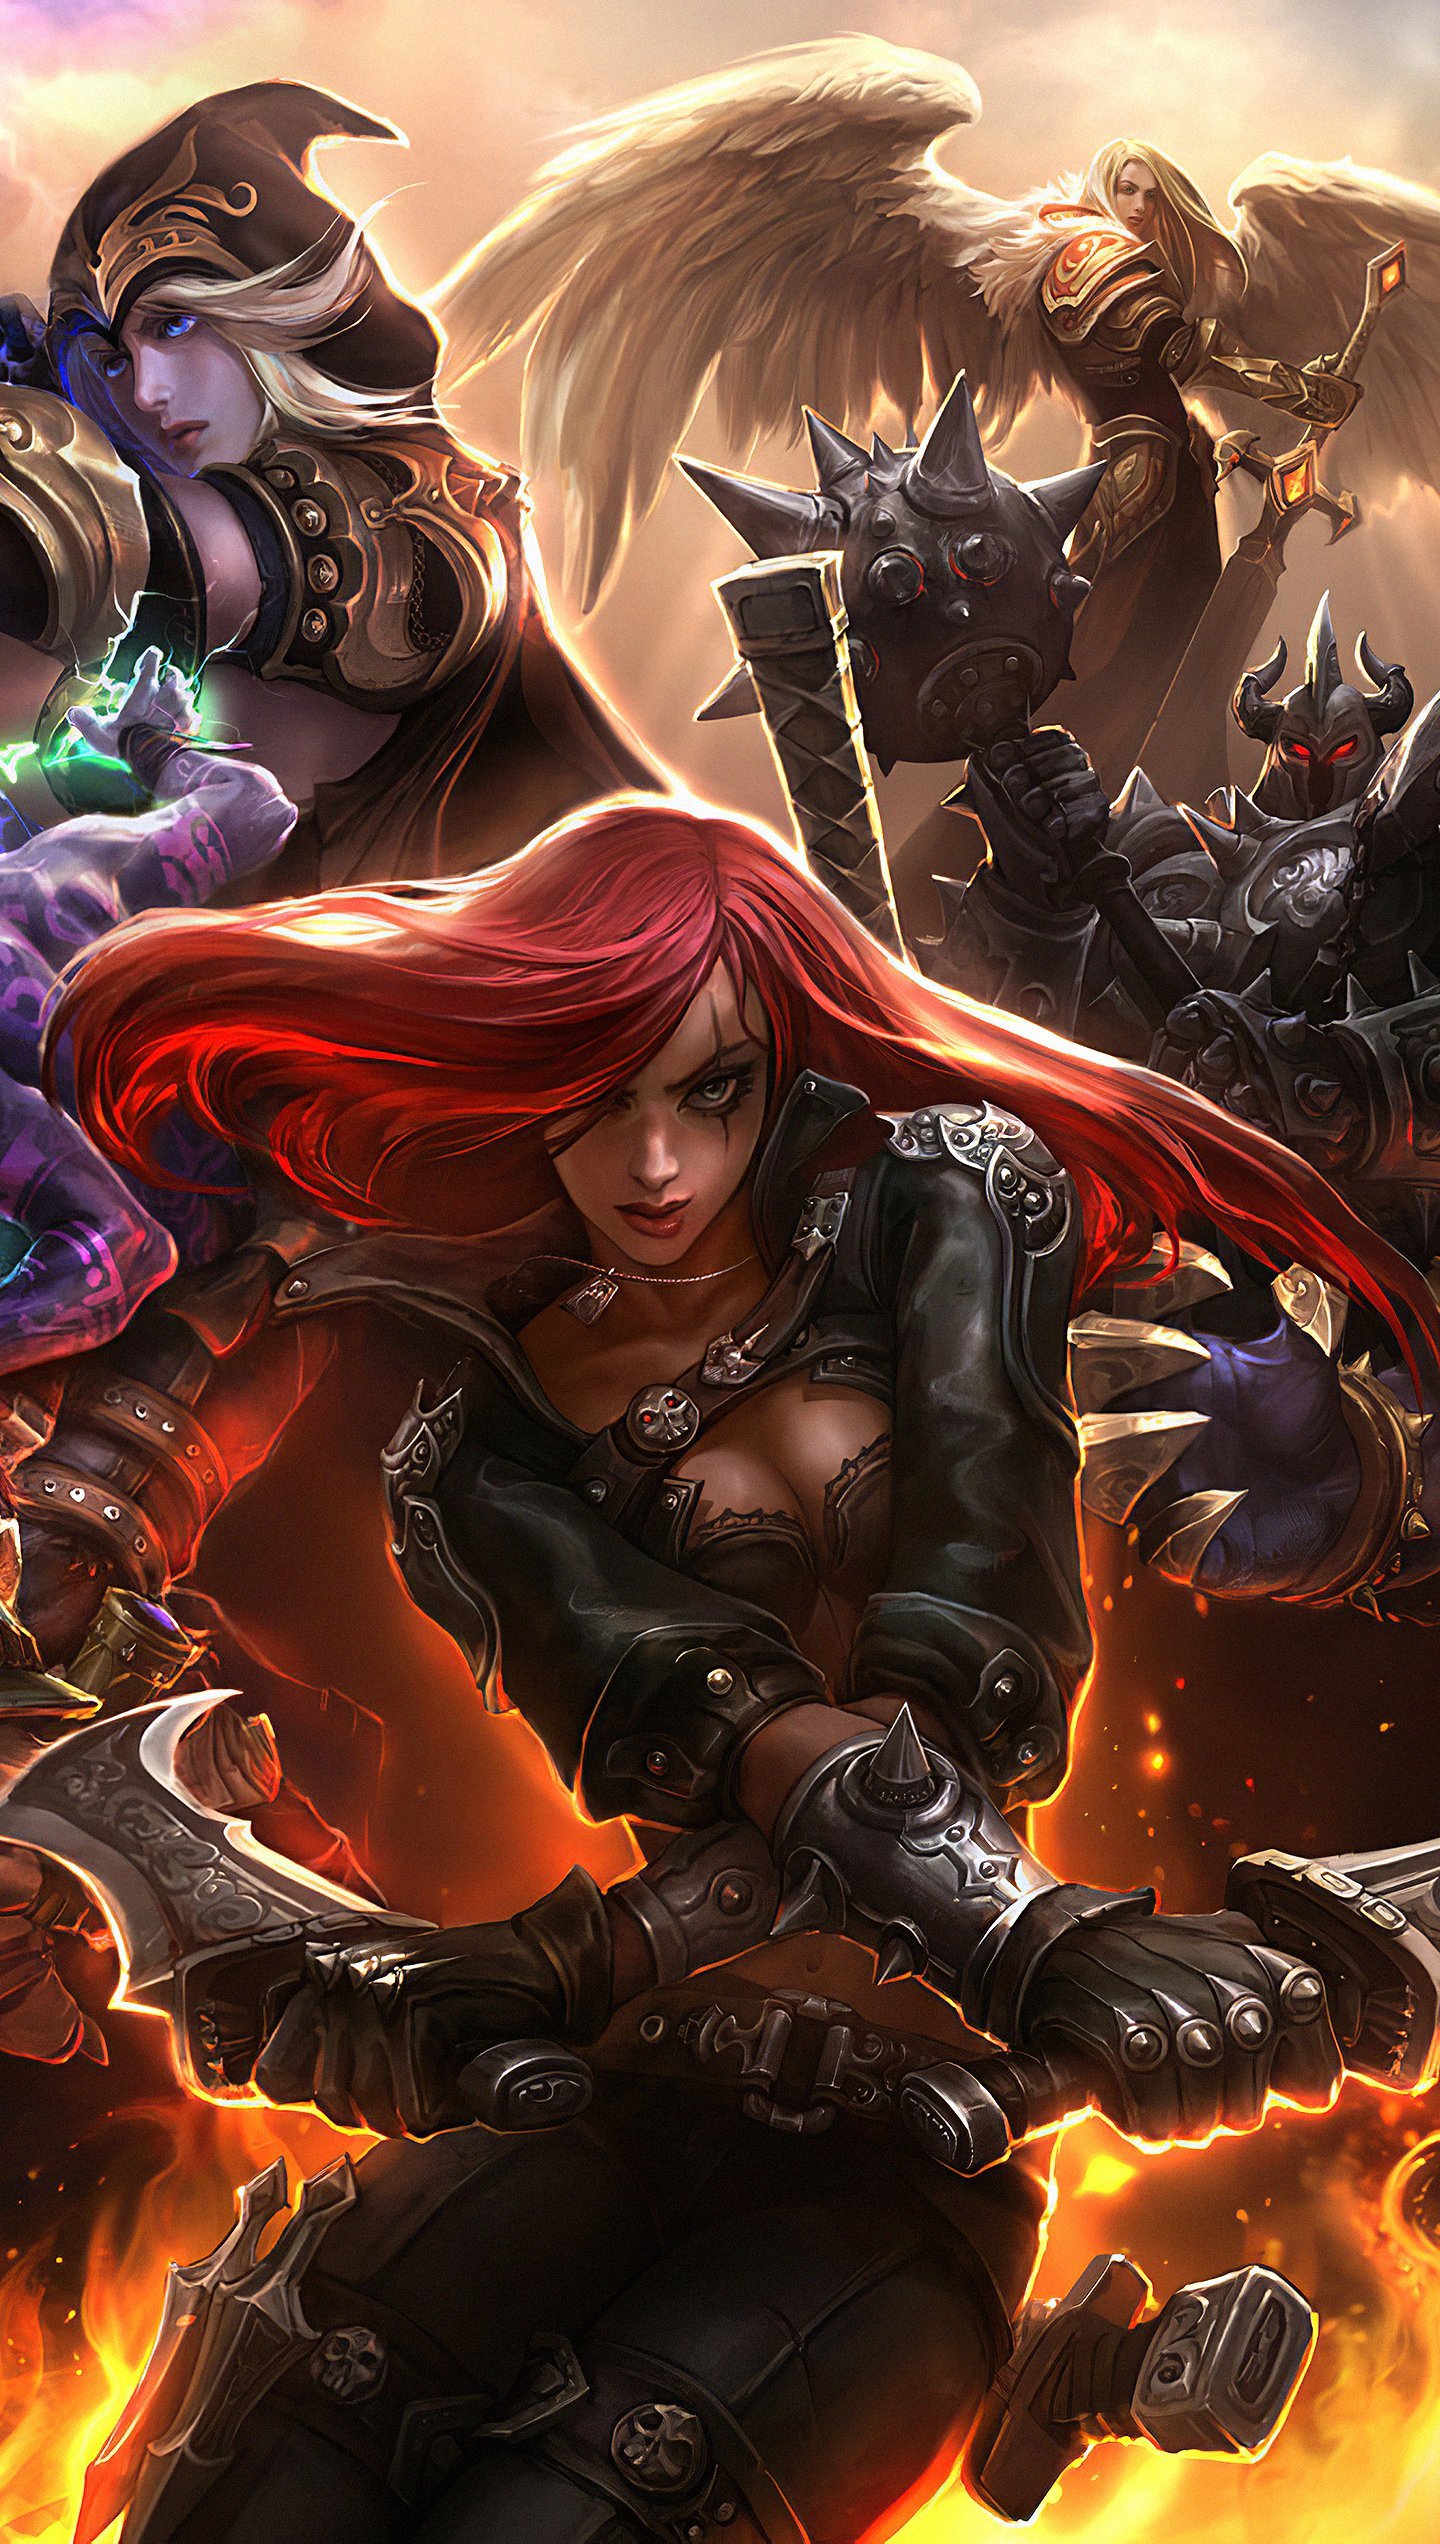 The Characters from League of legends Wallpaper 4k Ultra HD ID:5283